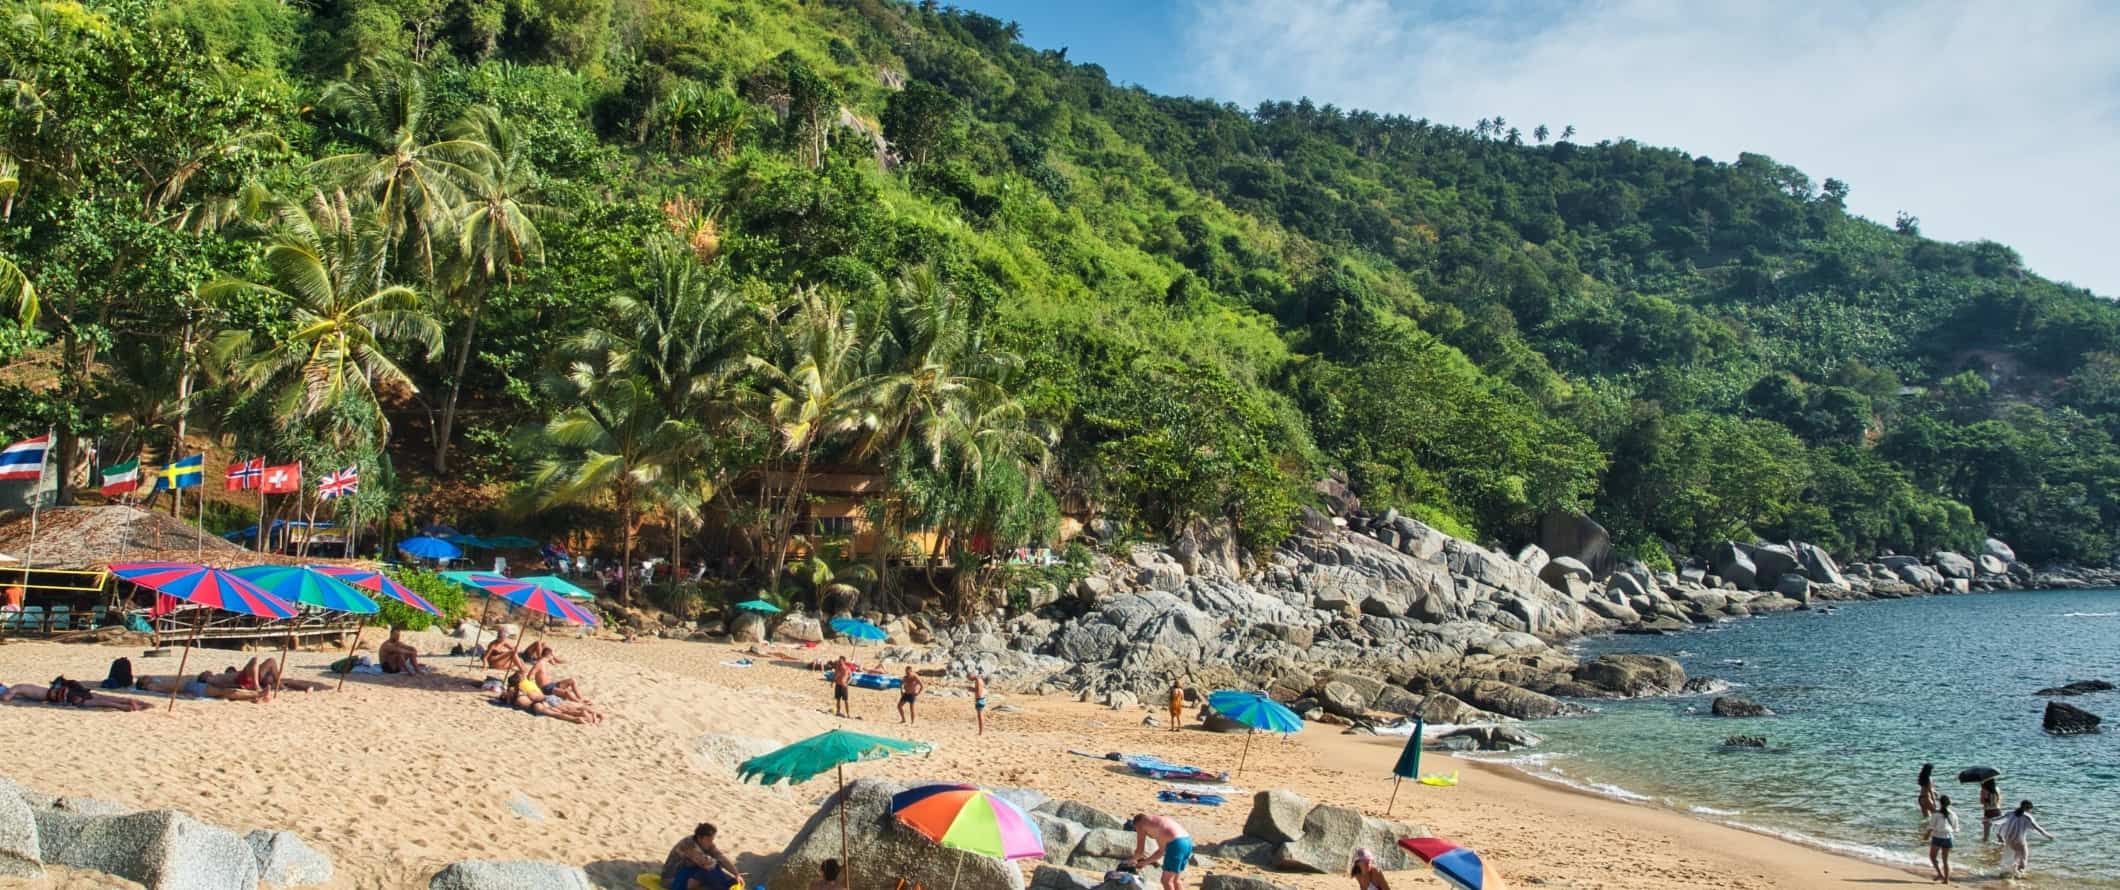 People lounging on a sandy beach in Phuket, Thailand